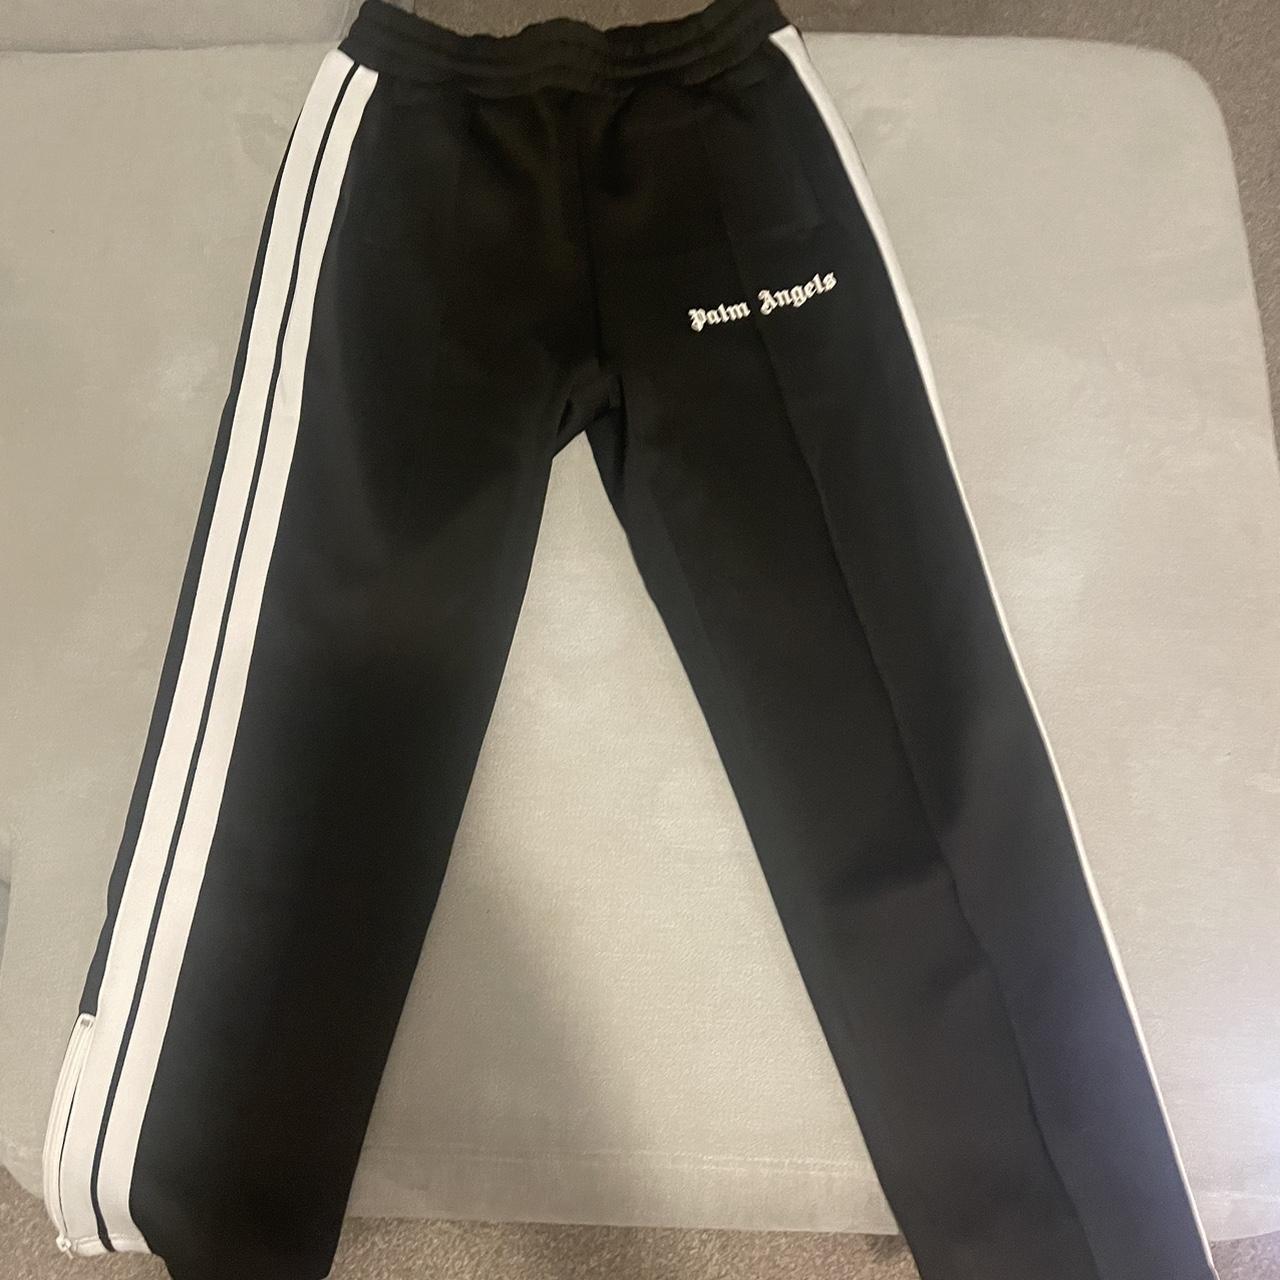 Palm angels tracksuit bottoms. I didn’t really like... - Depop